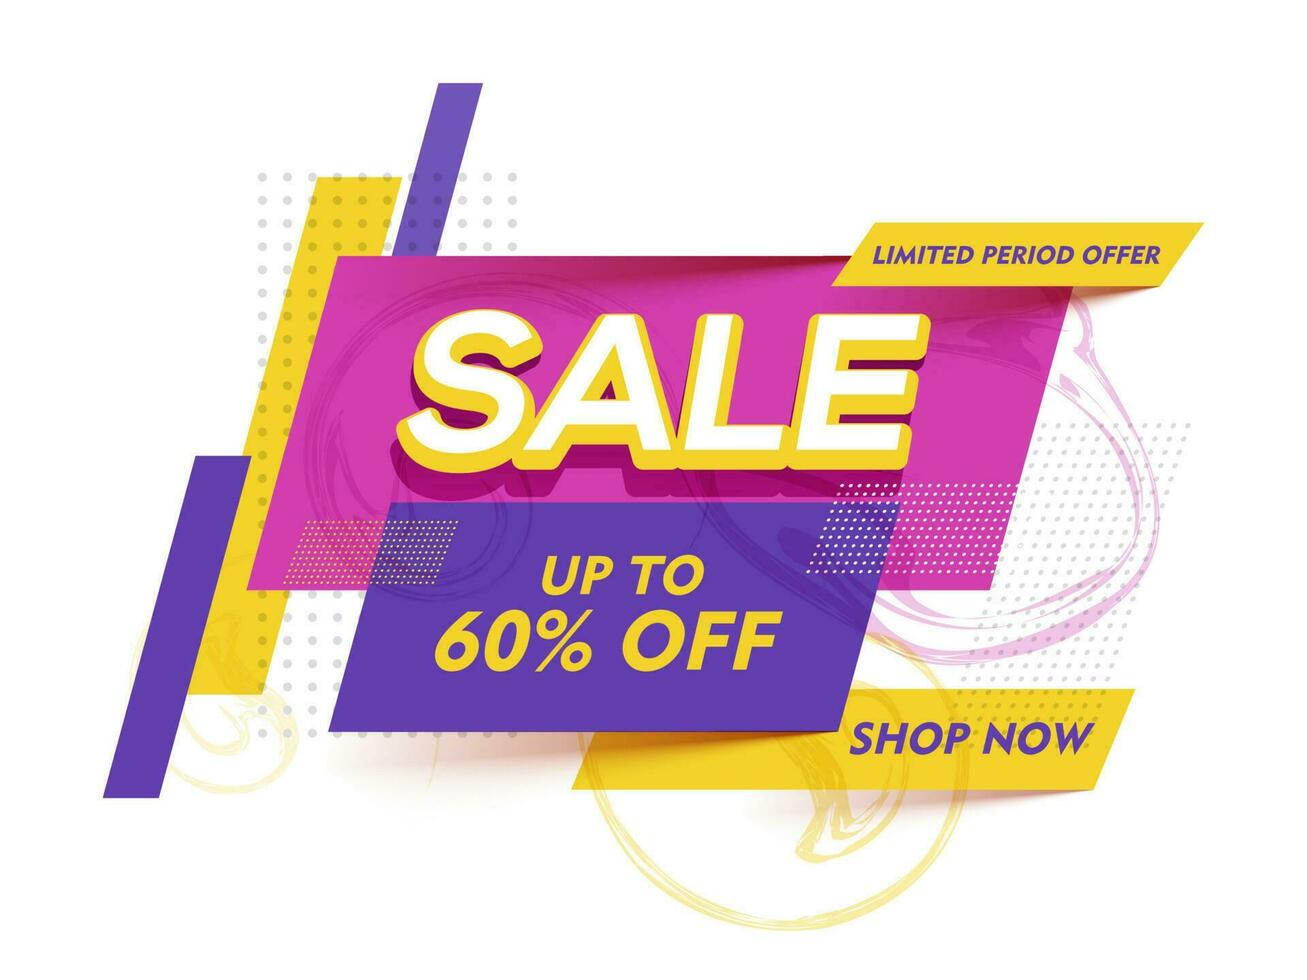 UP TO 60 off for Sale Limited Period Offer on abstract background can be used as poster or banner design. vector